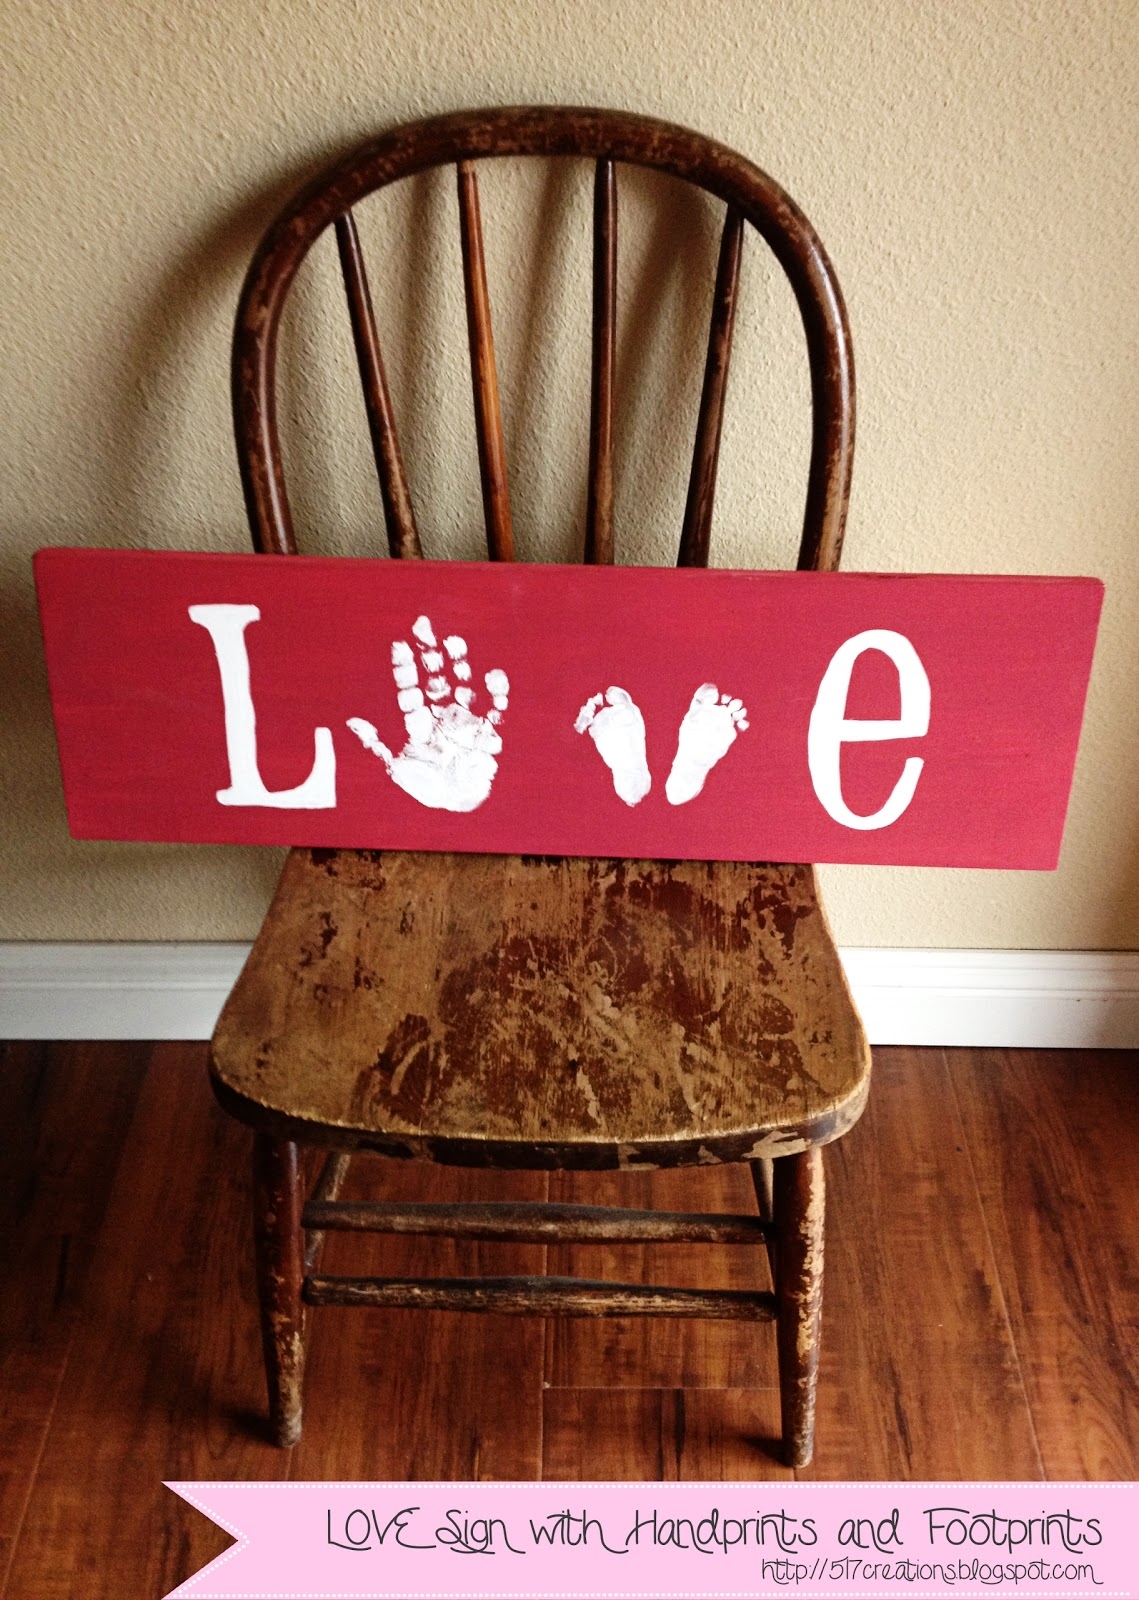 Hand Print Gift Ideas throughout Handprint Footprint With Siblings Ideas